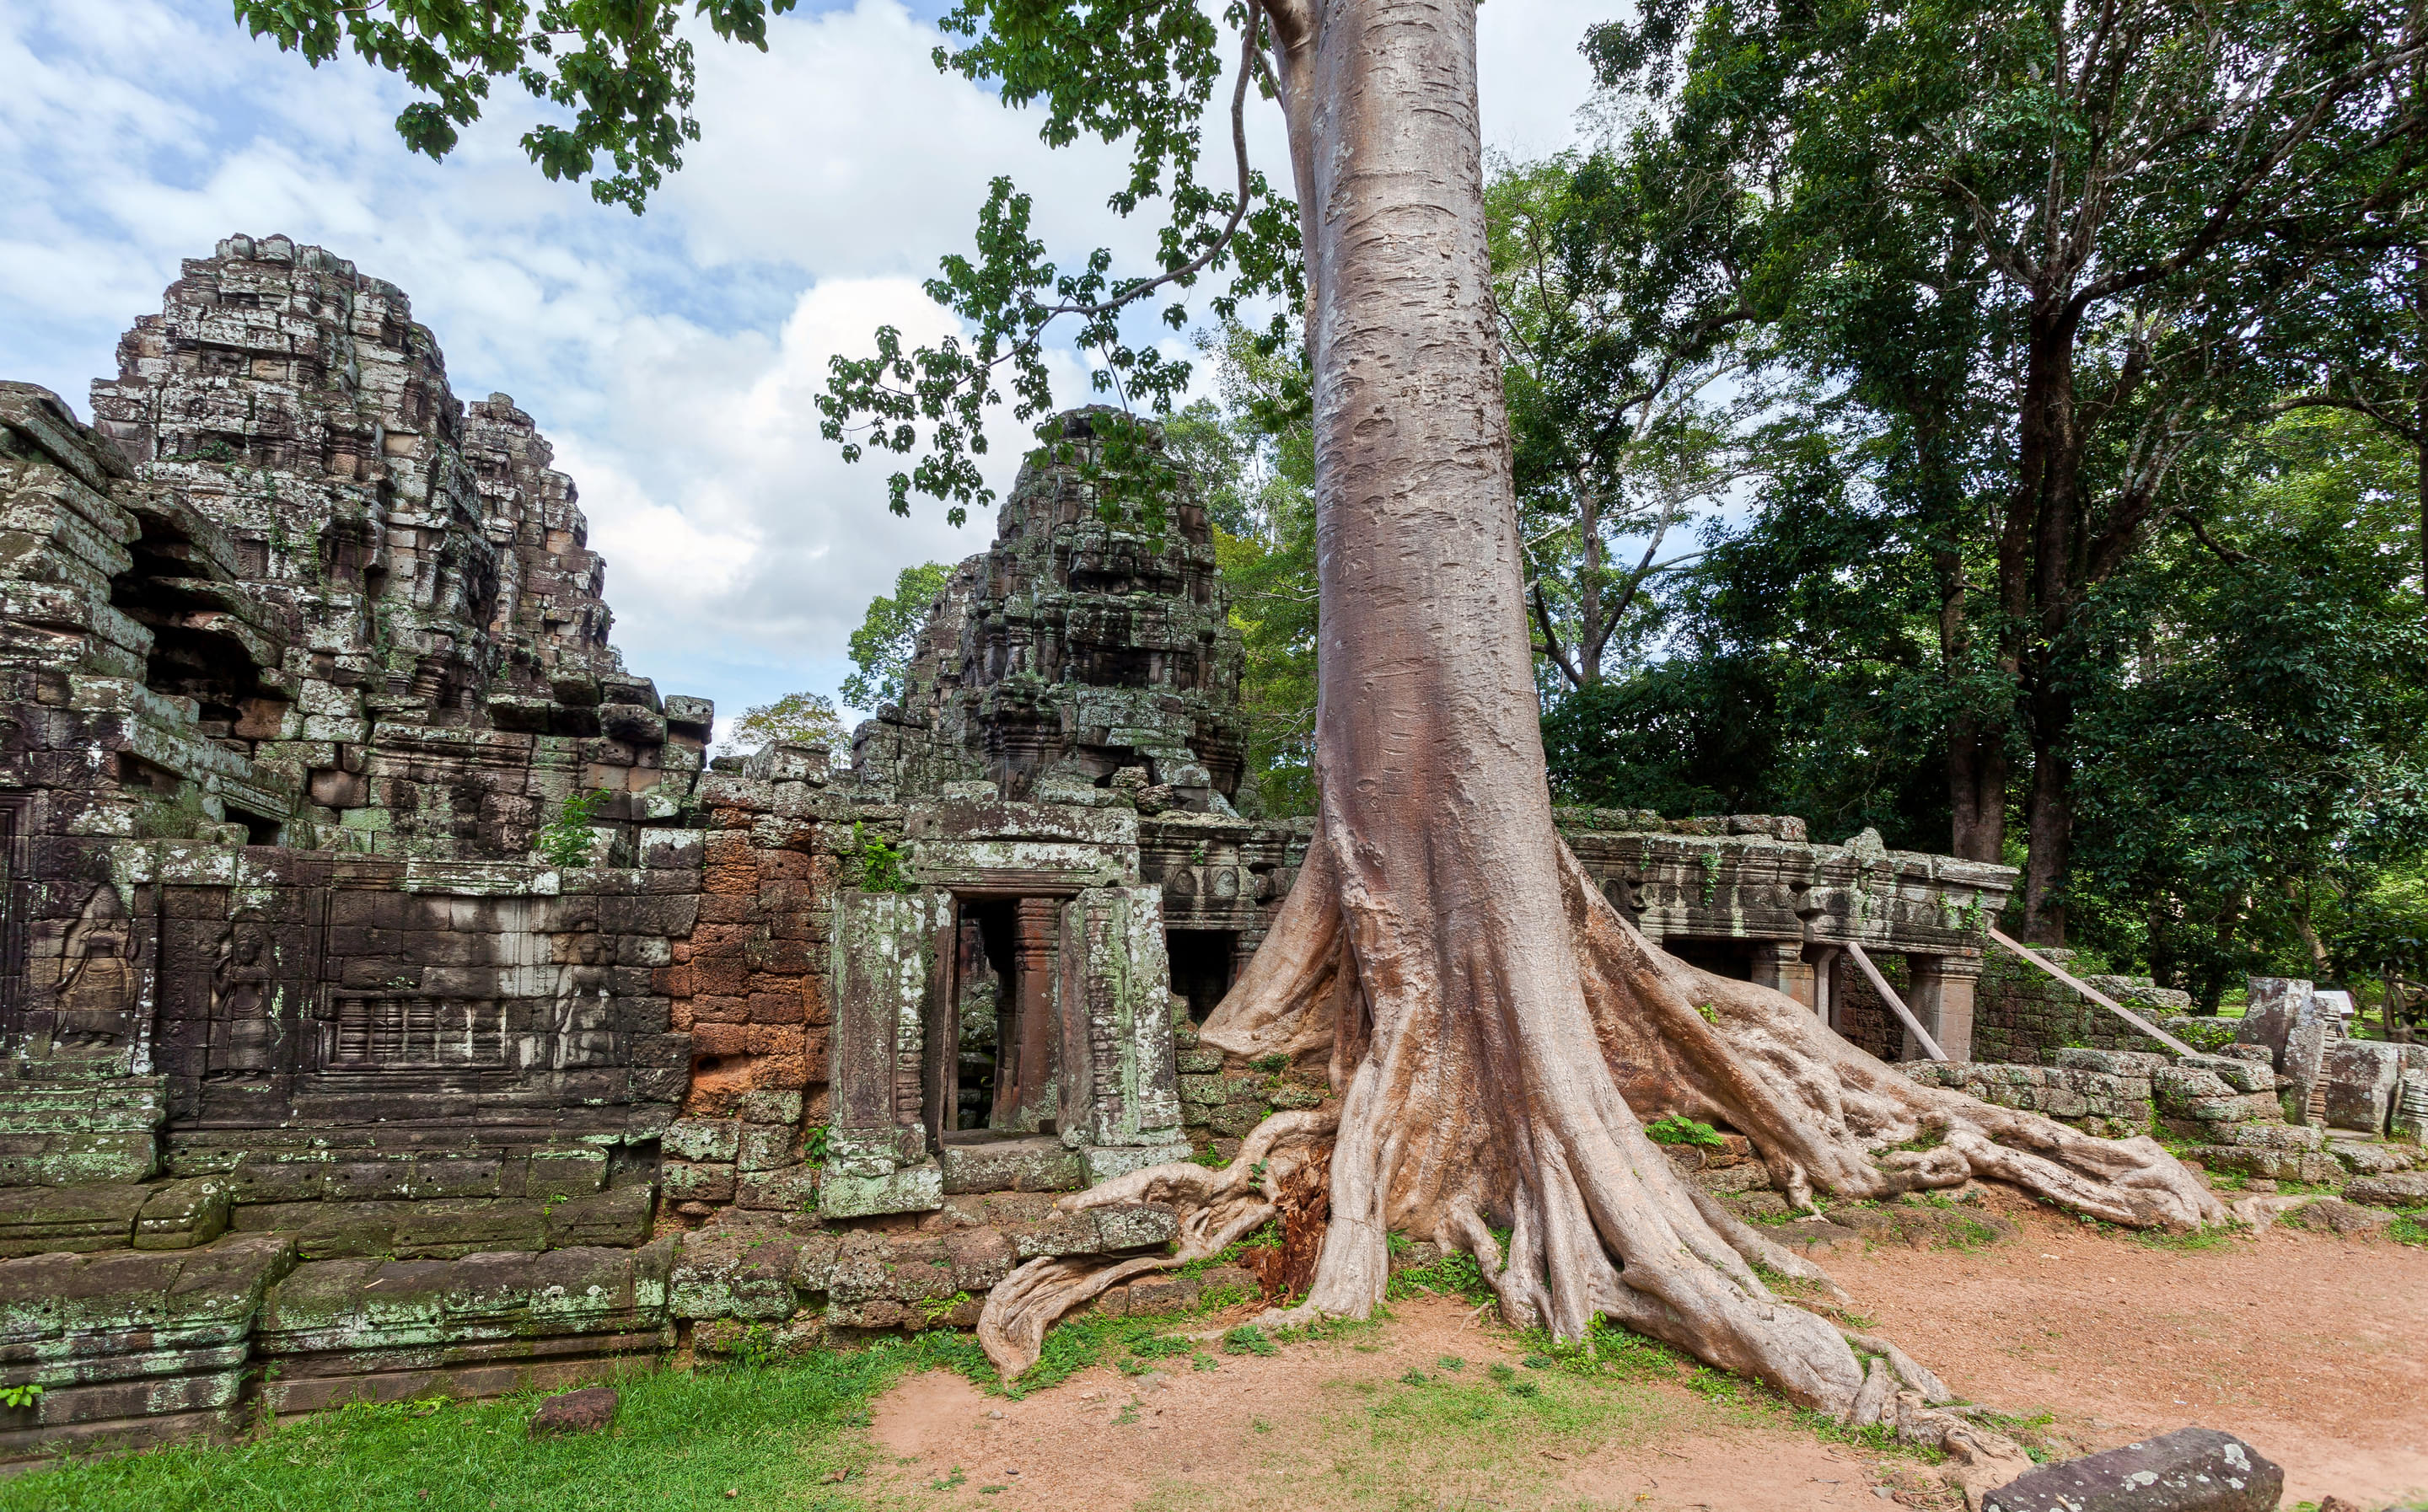 Banteay Kdei Overview